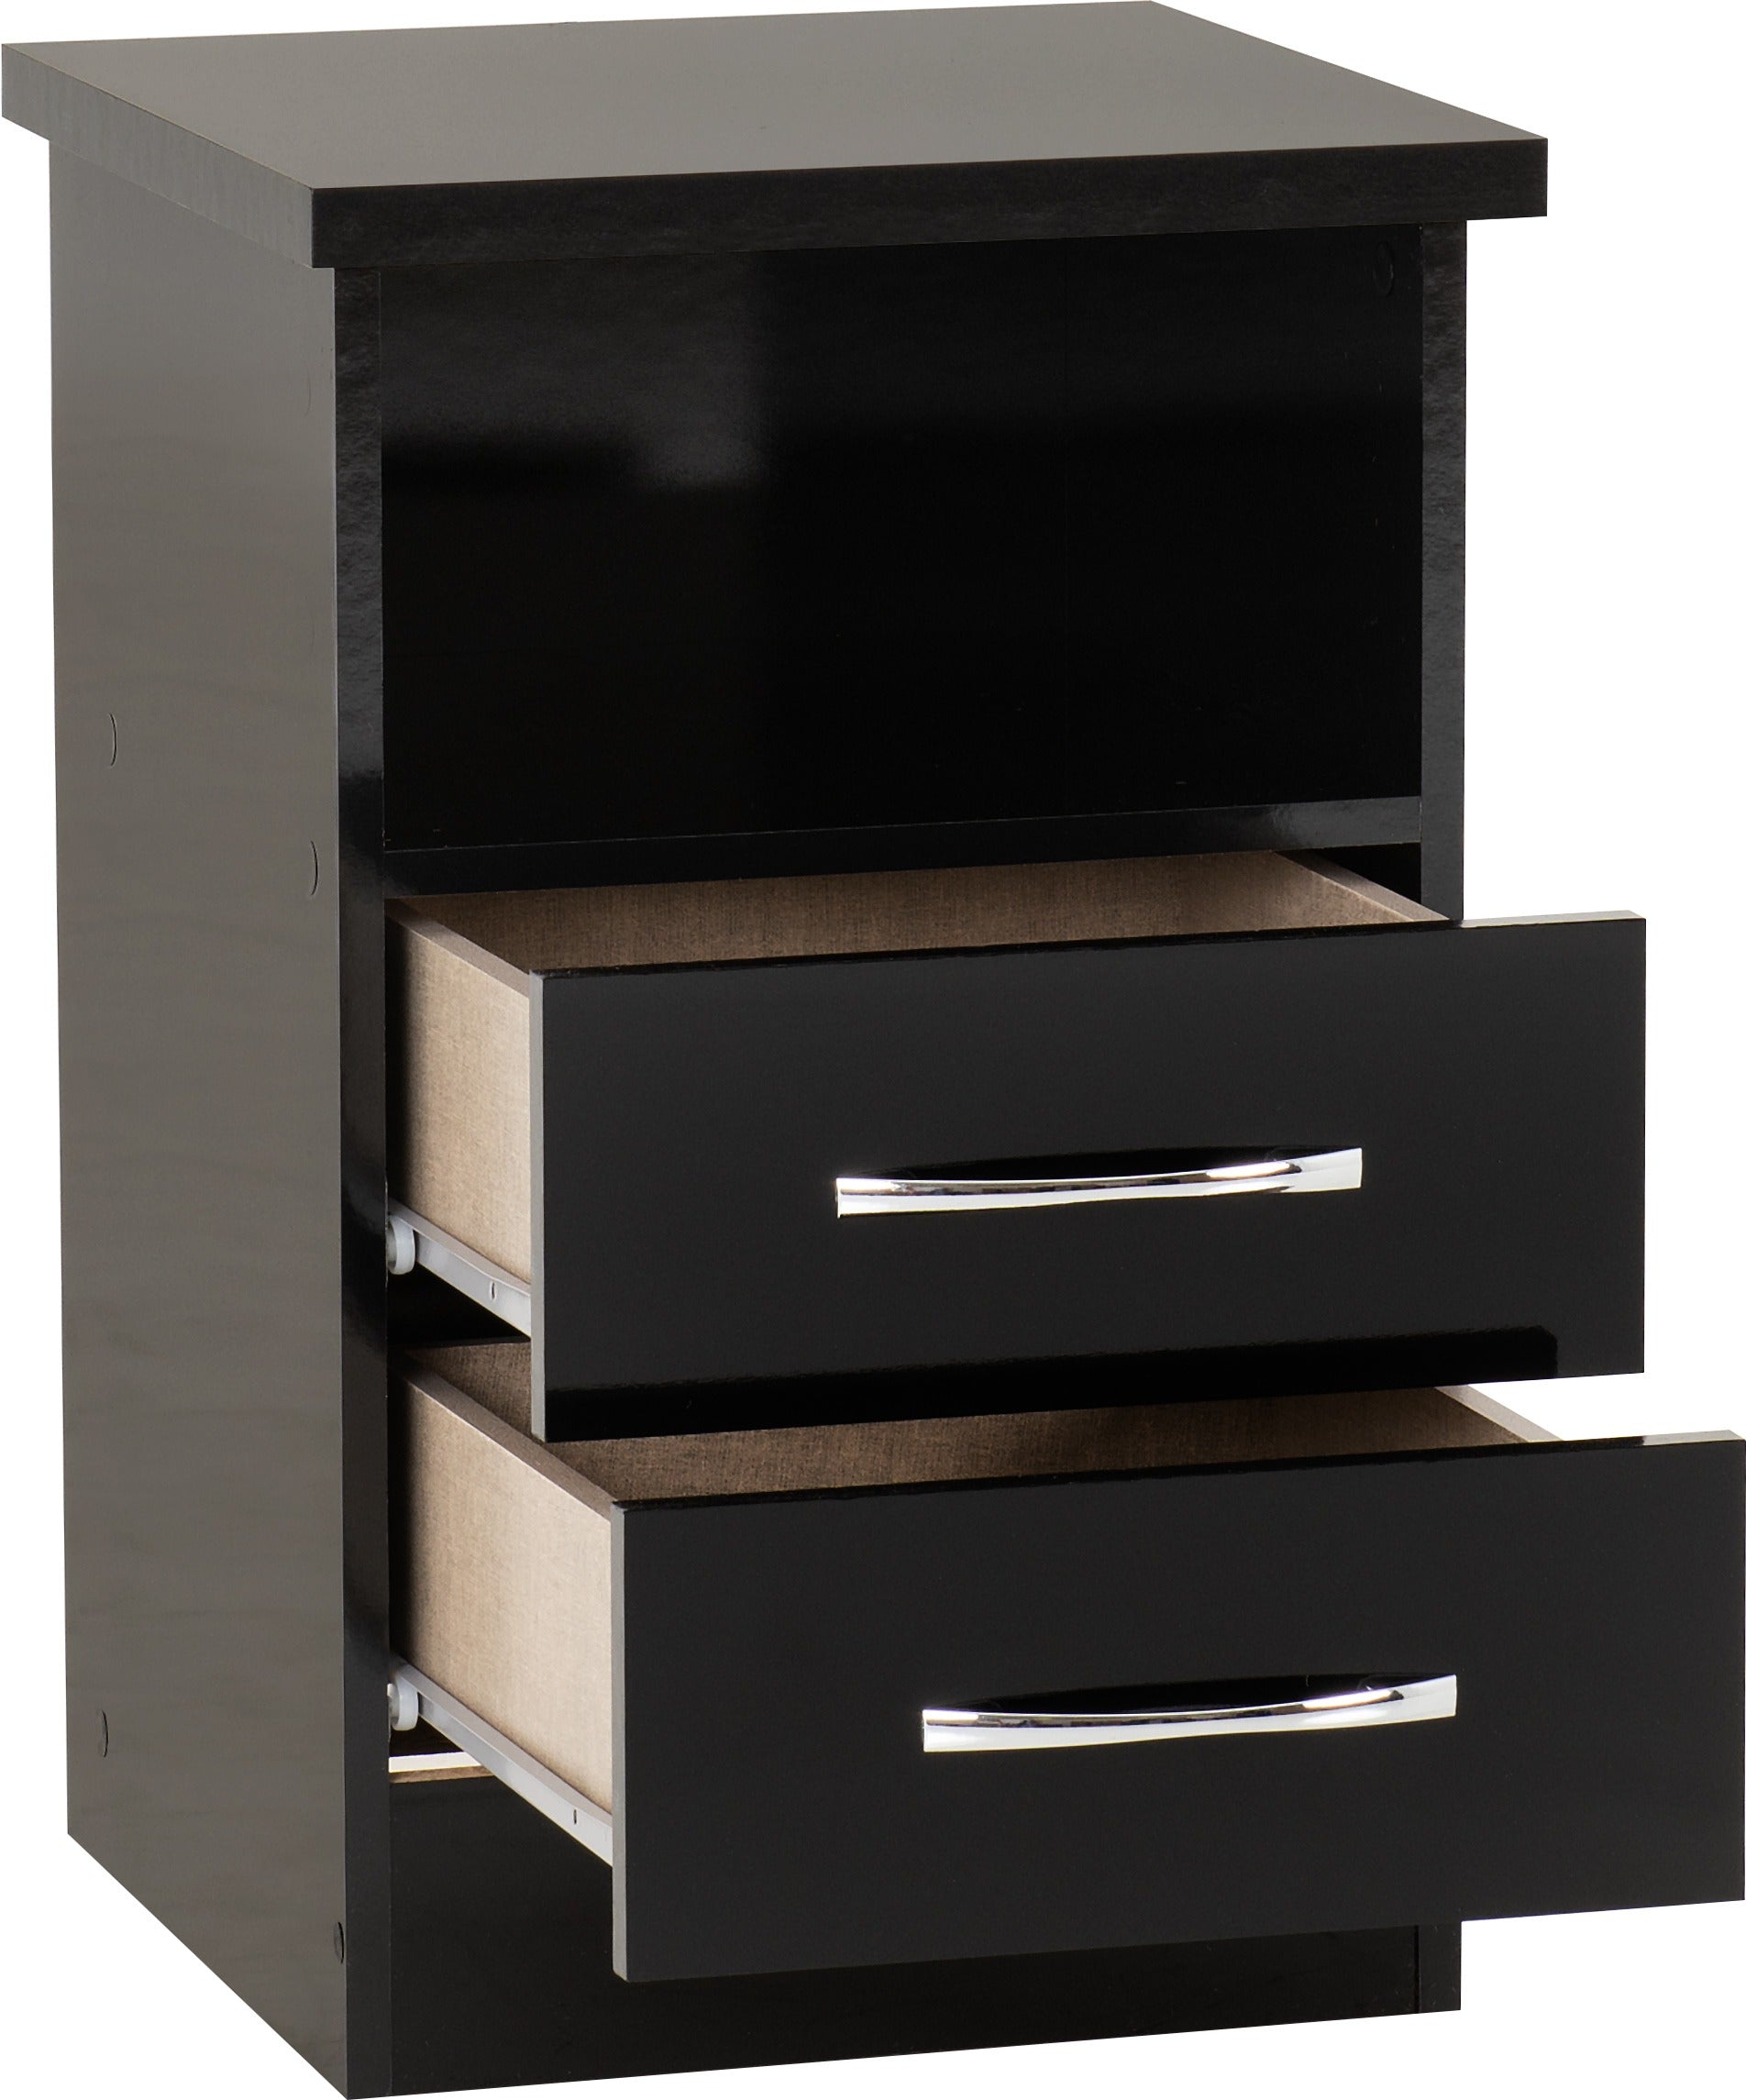 Nevada 2 Drawer Bedside in in Black Gloss Finish